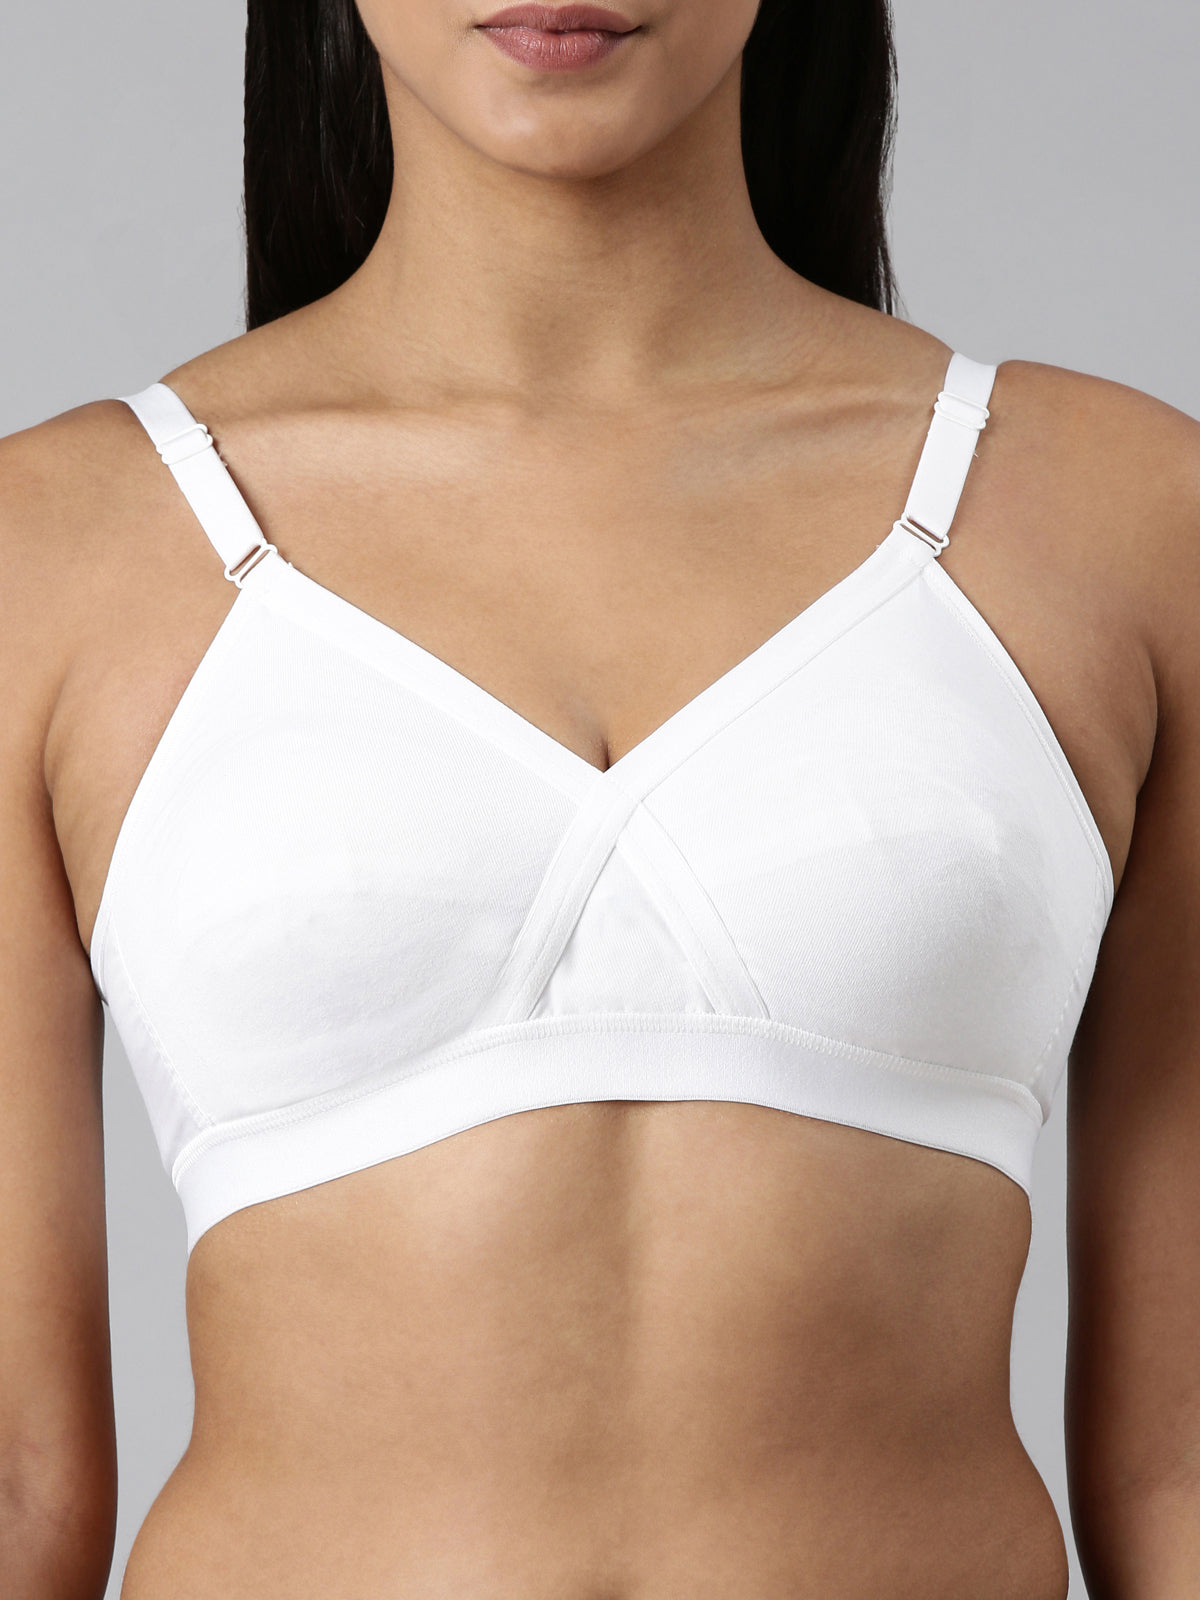 blossom-cotton cross-white1-Woven knitted-supportbra